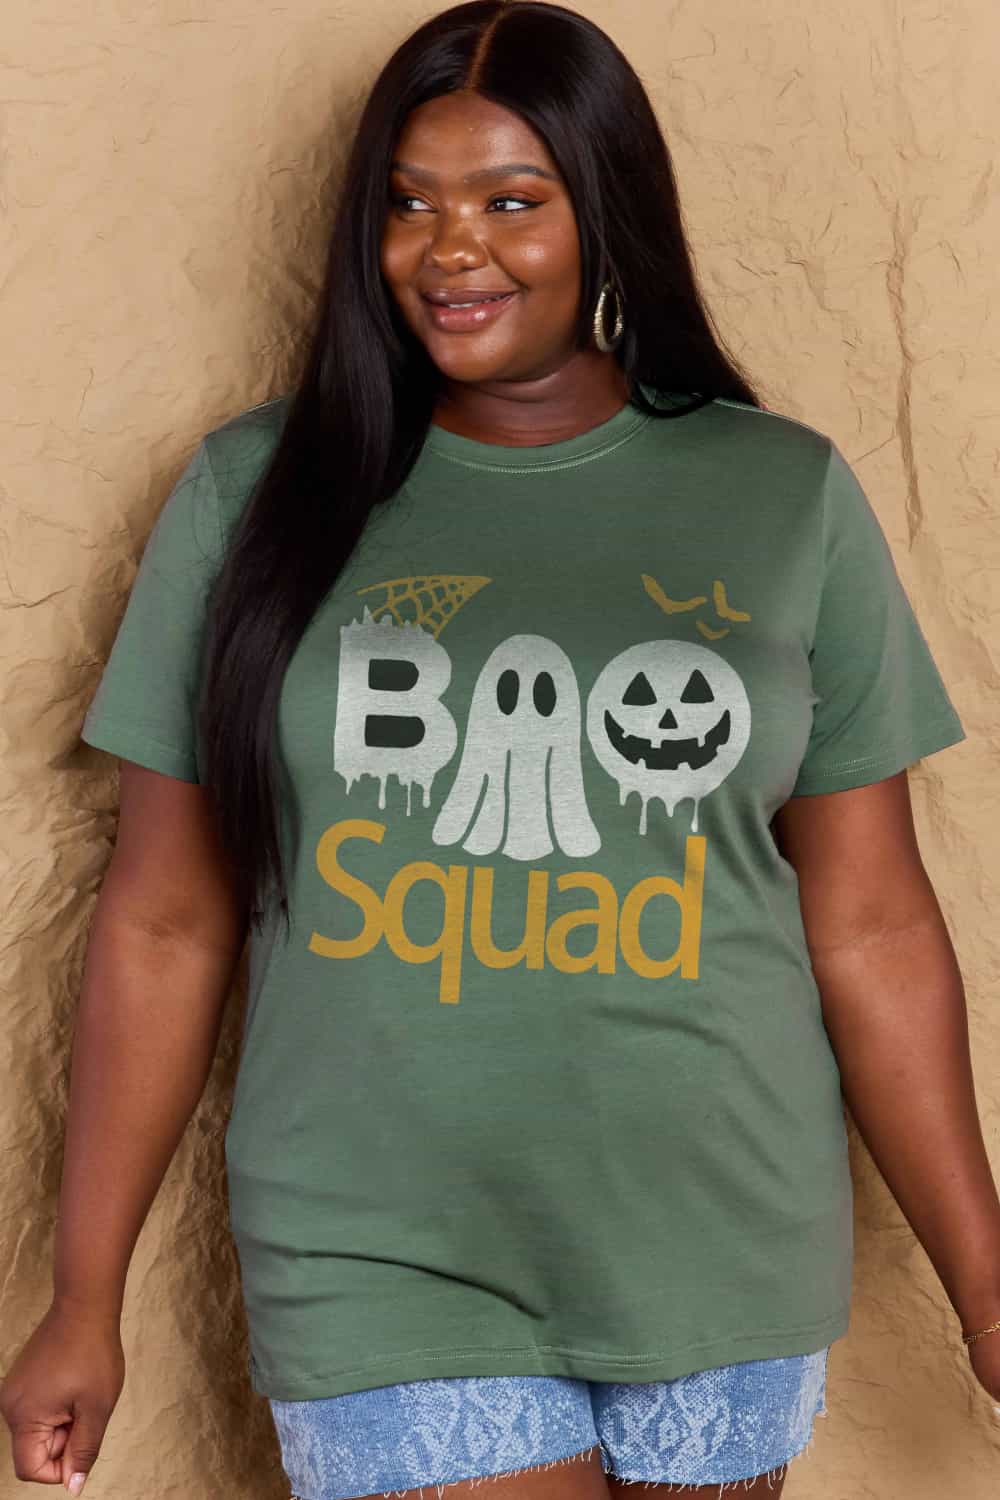 Full Size BOO SQUAD Graphic Cotton T-Shirt